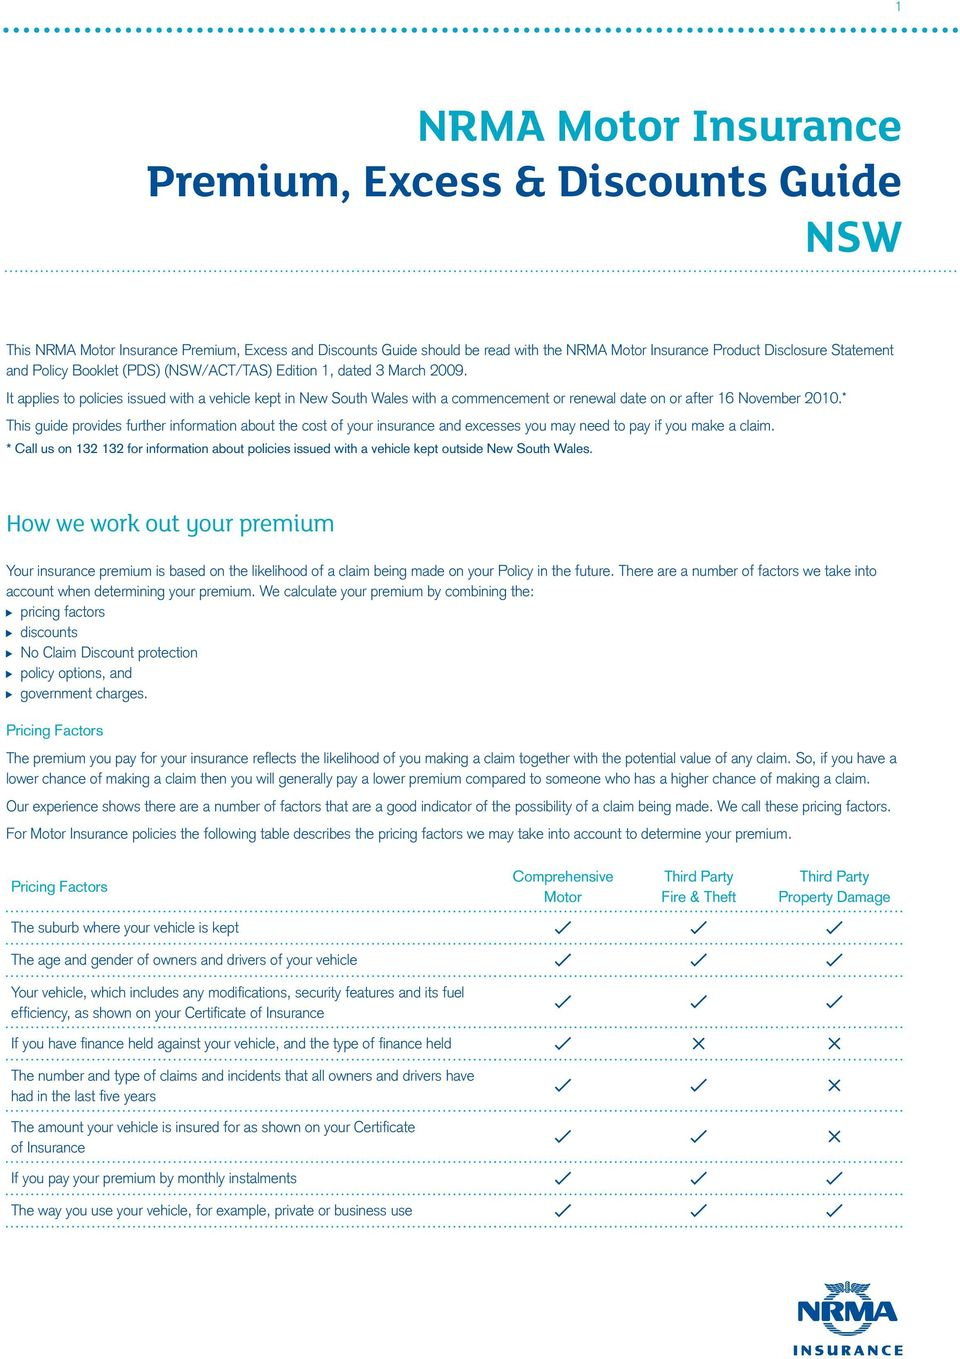 Nrma Motor Insurance Premium Excess Discounts Guide Nsw within size 960 X 1359